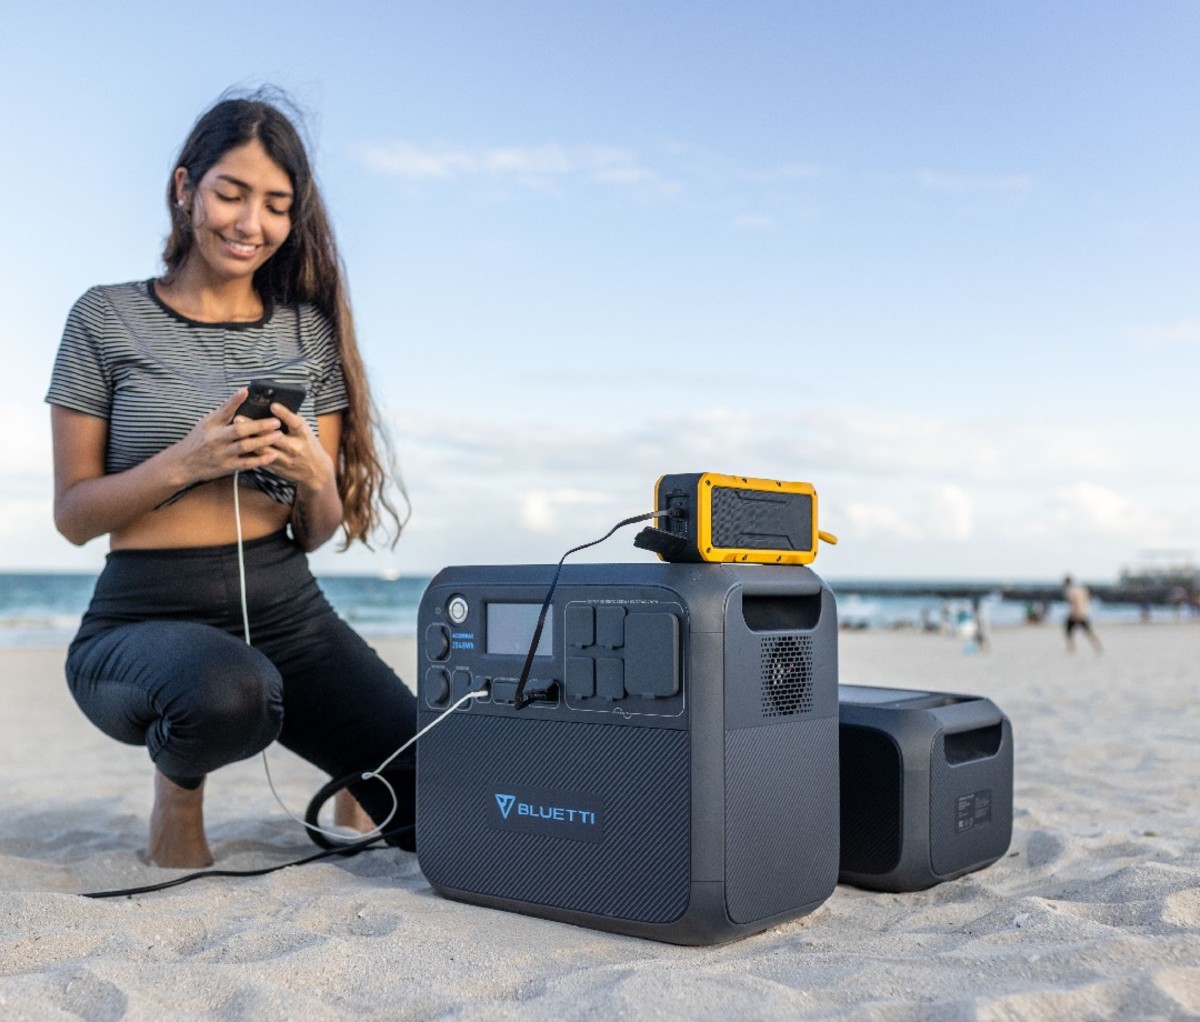 Woman charging her phone on the beach beside Bluetti portable power station